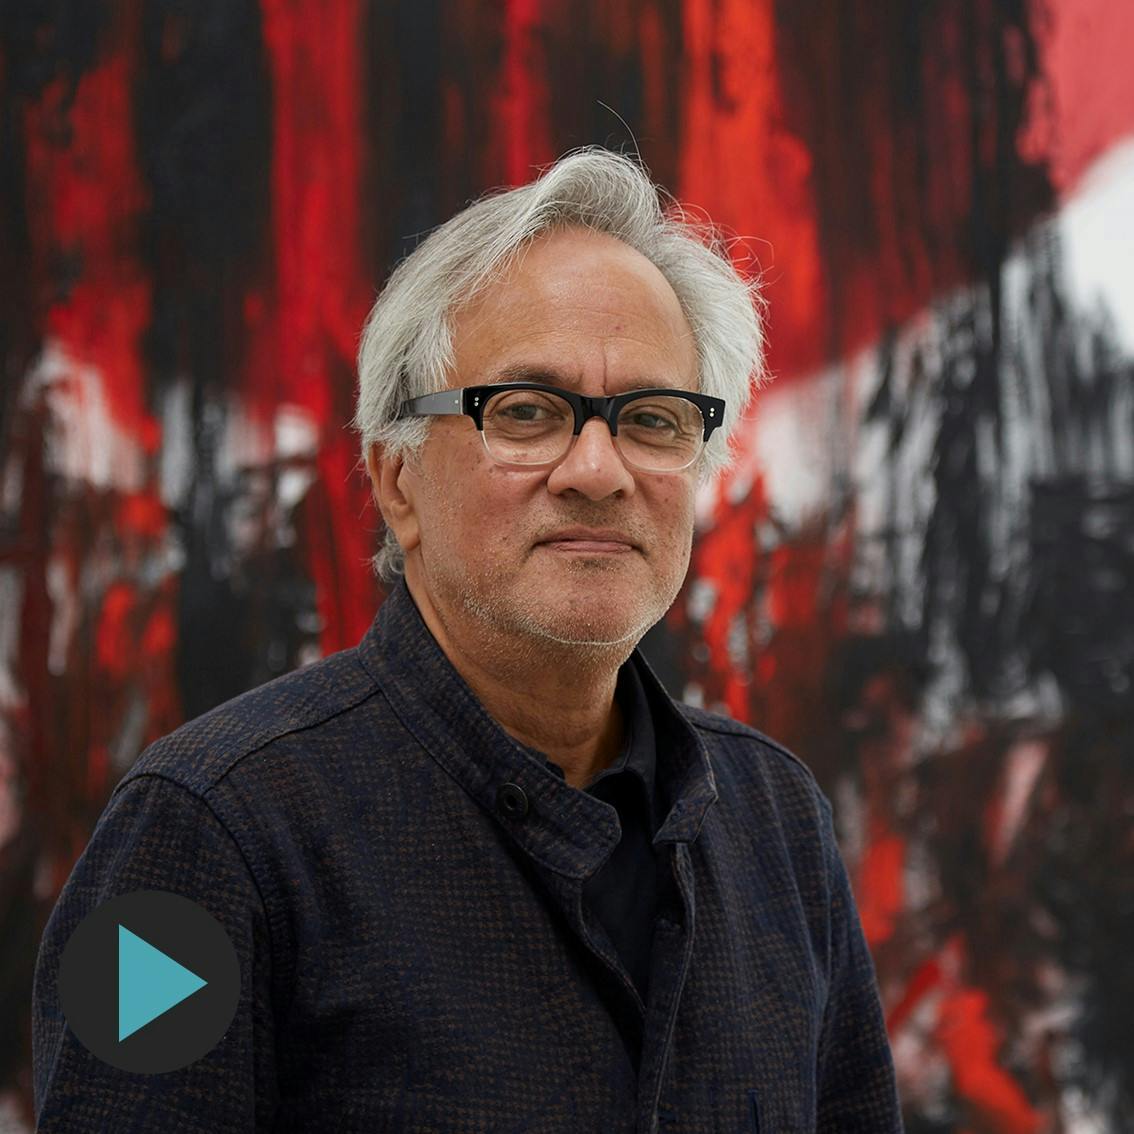 Anish Kapoor - a Life in Art